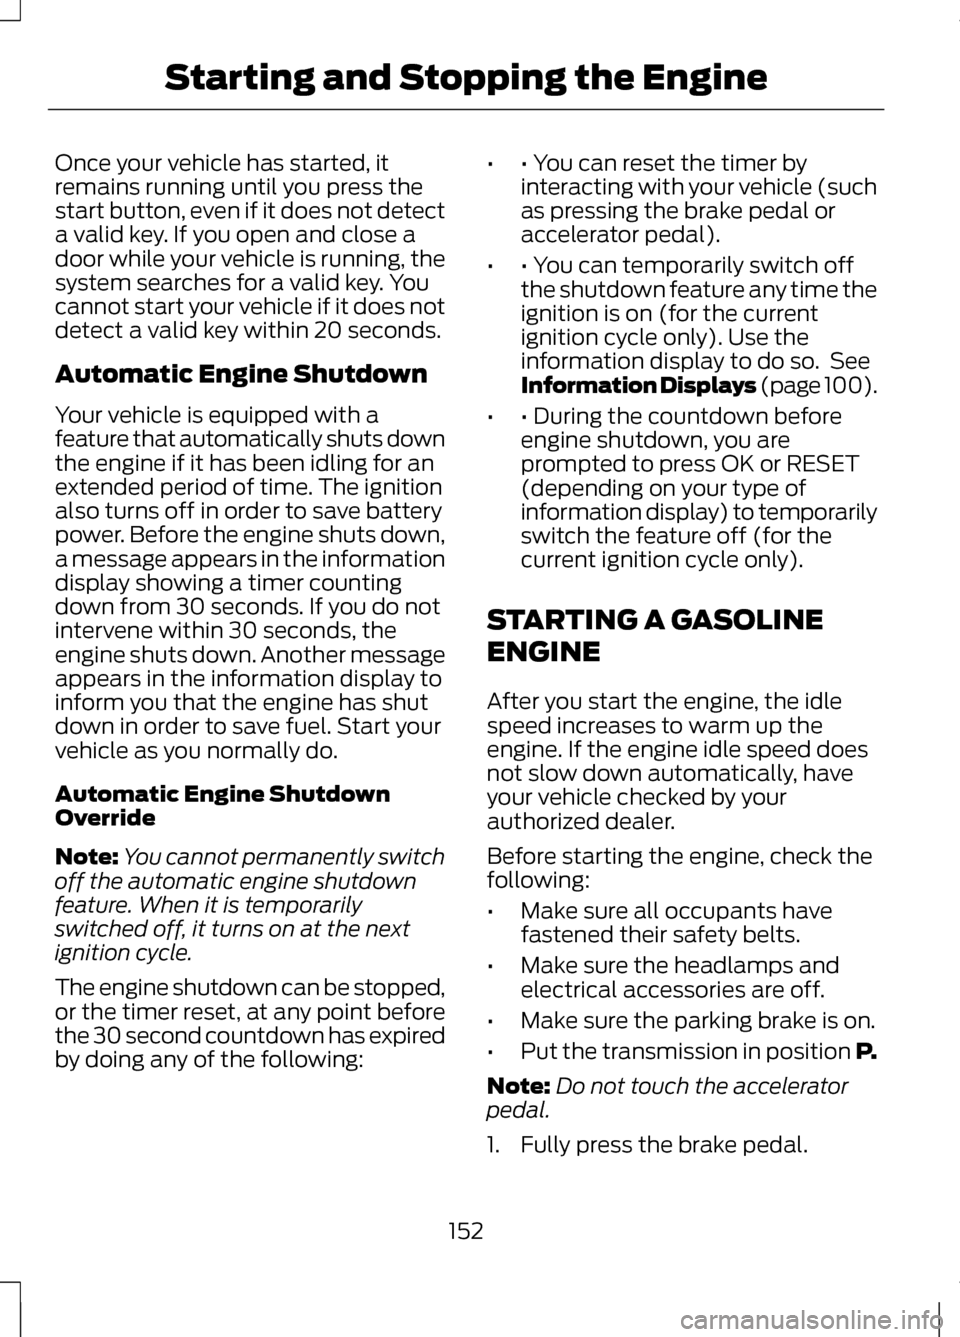 LINCOLN MKZ 2013  Owners Manual Once your vehicle has started, it
remains running until you press the
start button, even if it does not detect
a valid key. If you open and close a
door while your vehicle is running, the
system searc